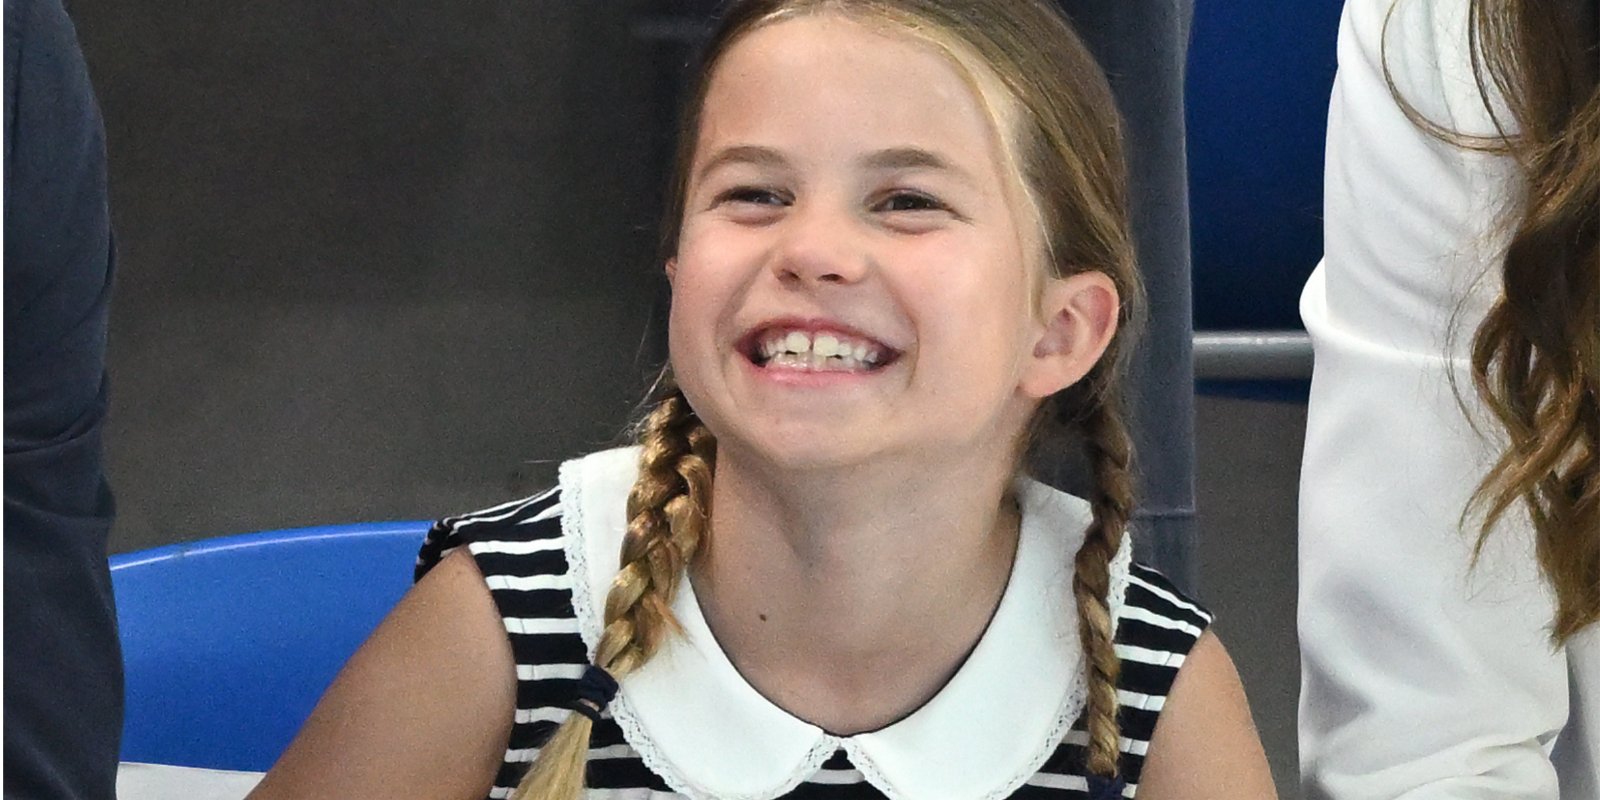 Princess Charlotte wears a stiped dress with a peter pan collar as she smiles for the cameras.